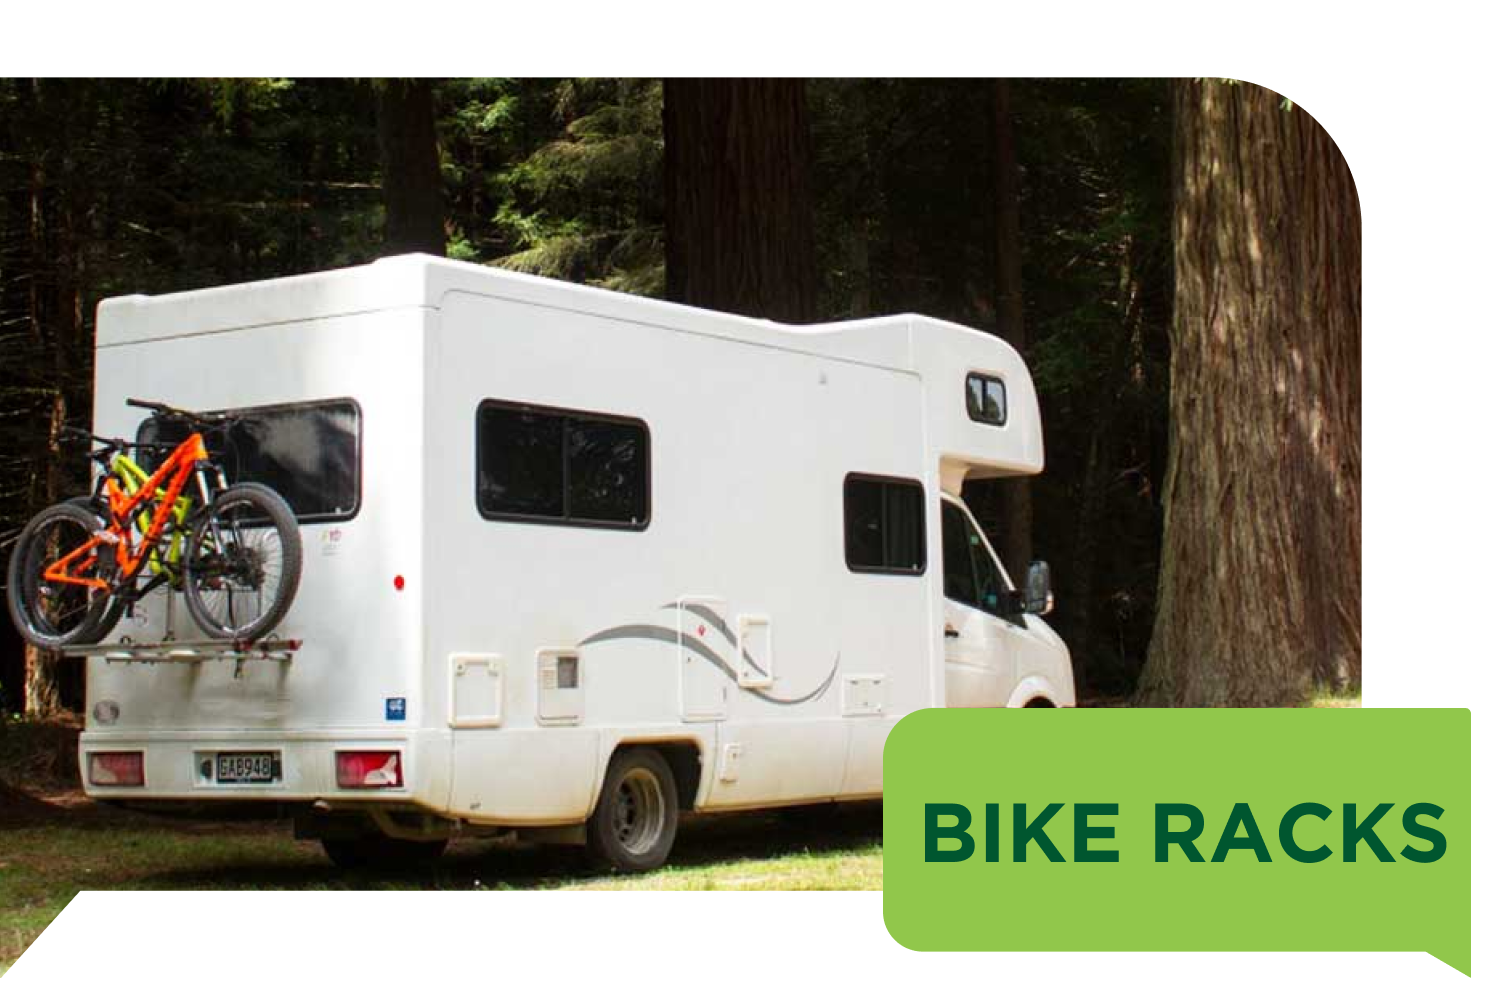 Motorhome off-grid with motorhome bike rack attached